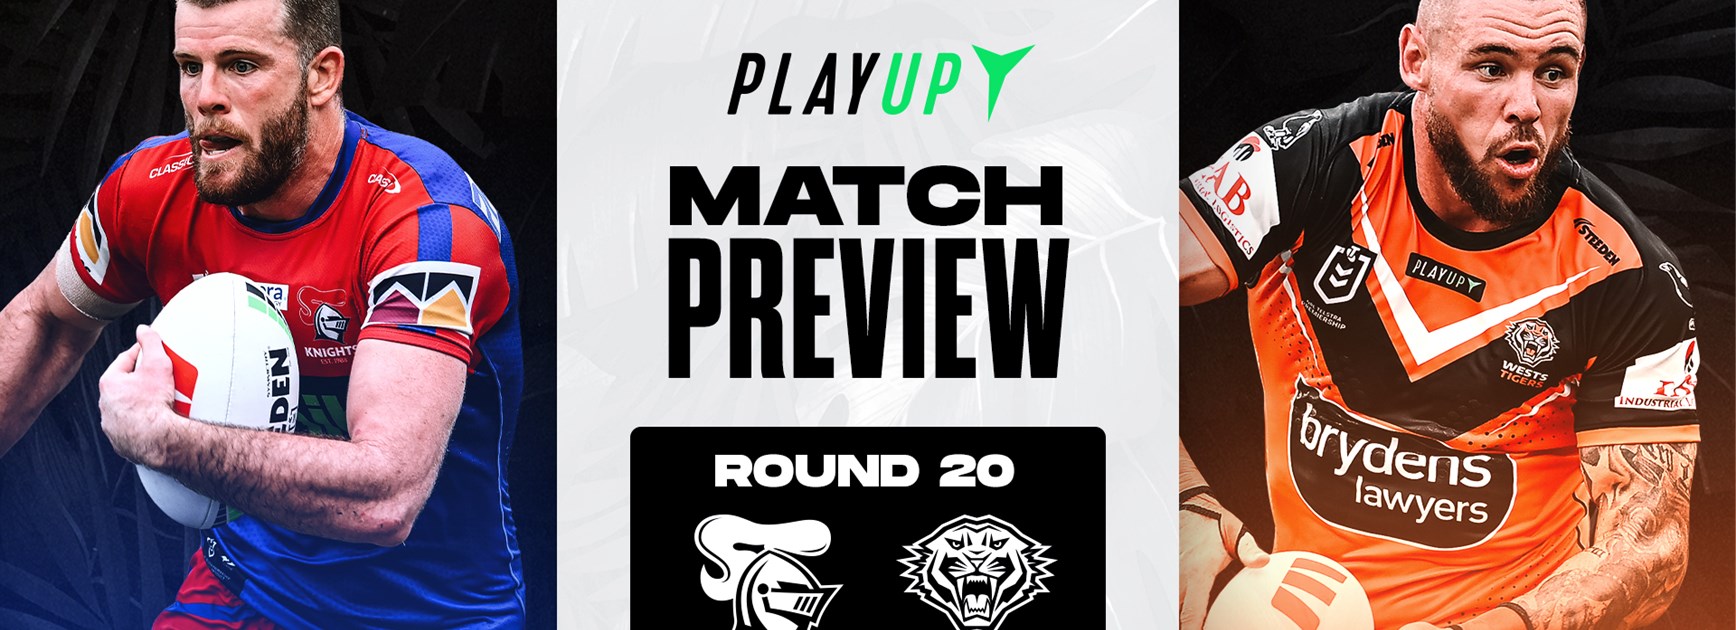 Match Preview: Round 20 vs Knights